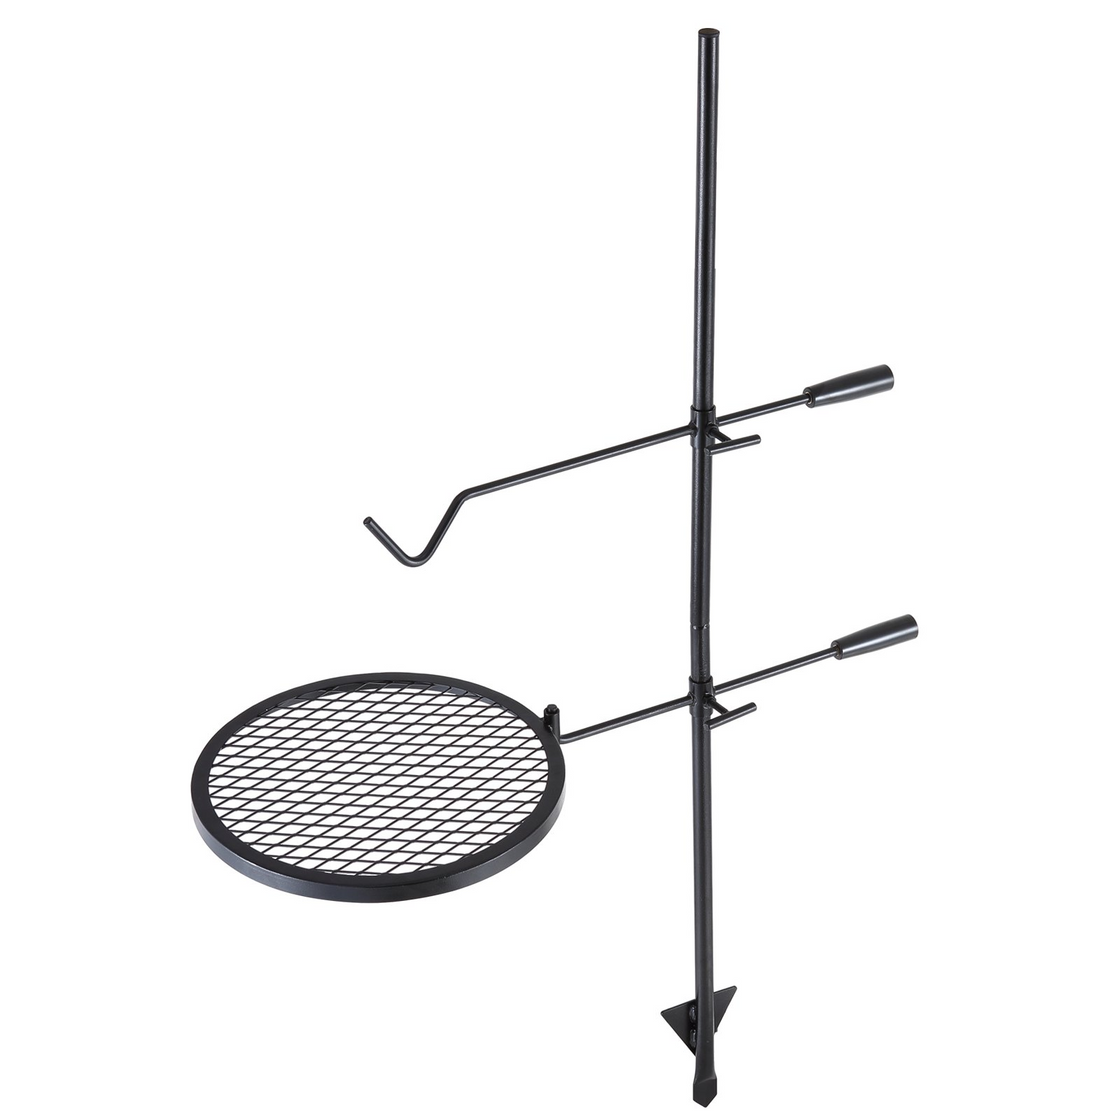 VEVOR Swivel Campfire Grill - Heavy Duty Steel Grill Grates for Outdoor Cooking